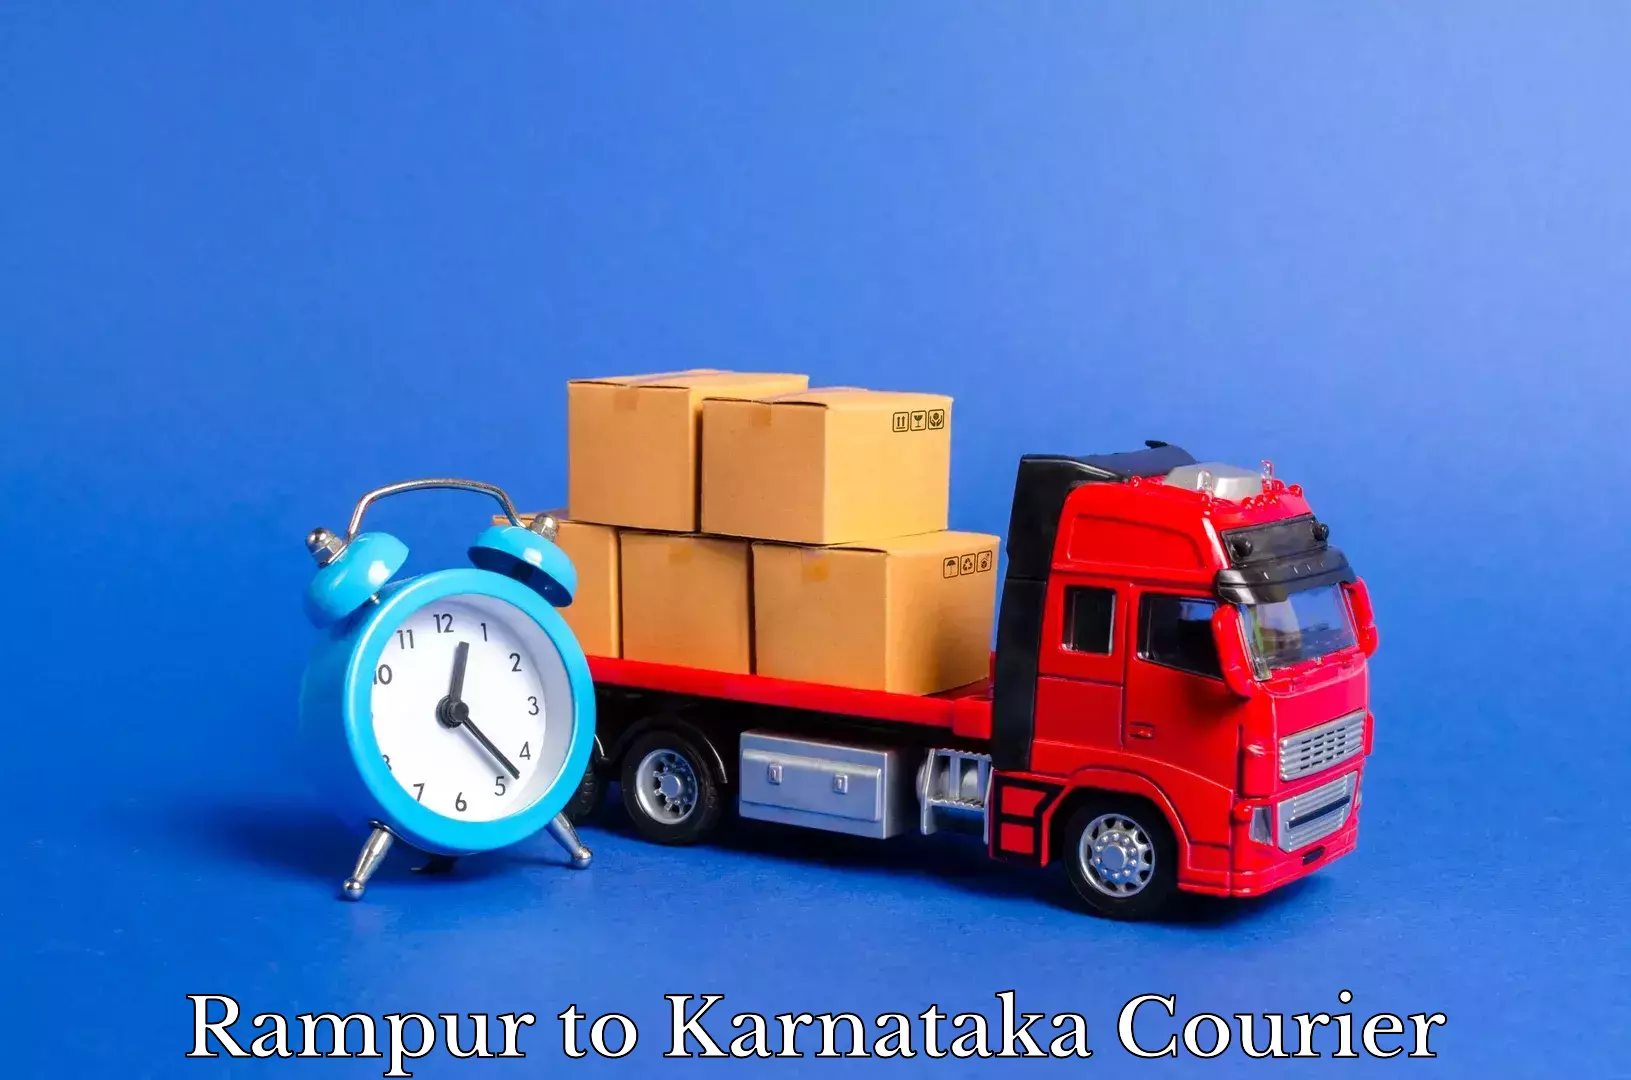 Household goods transport service Rampur to Mangalore